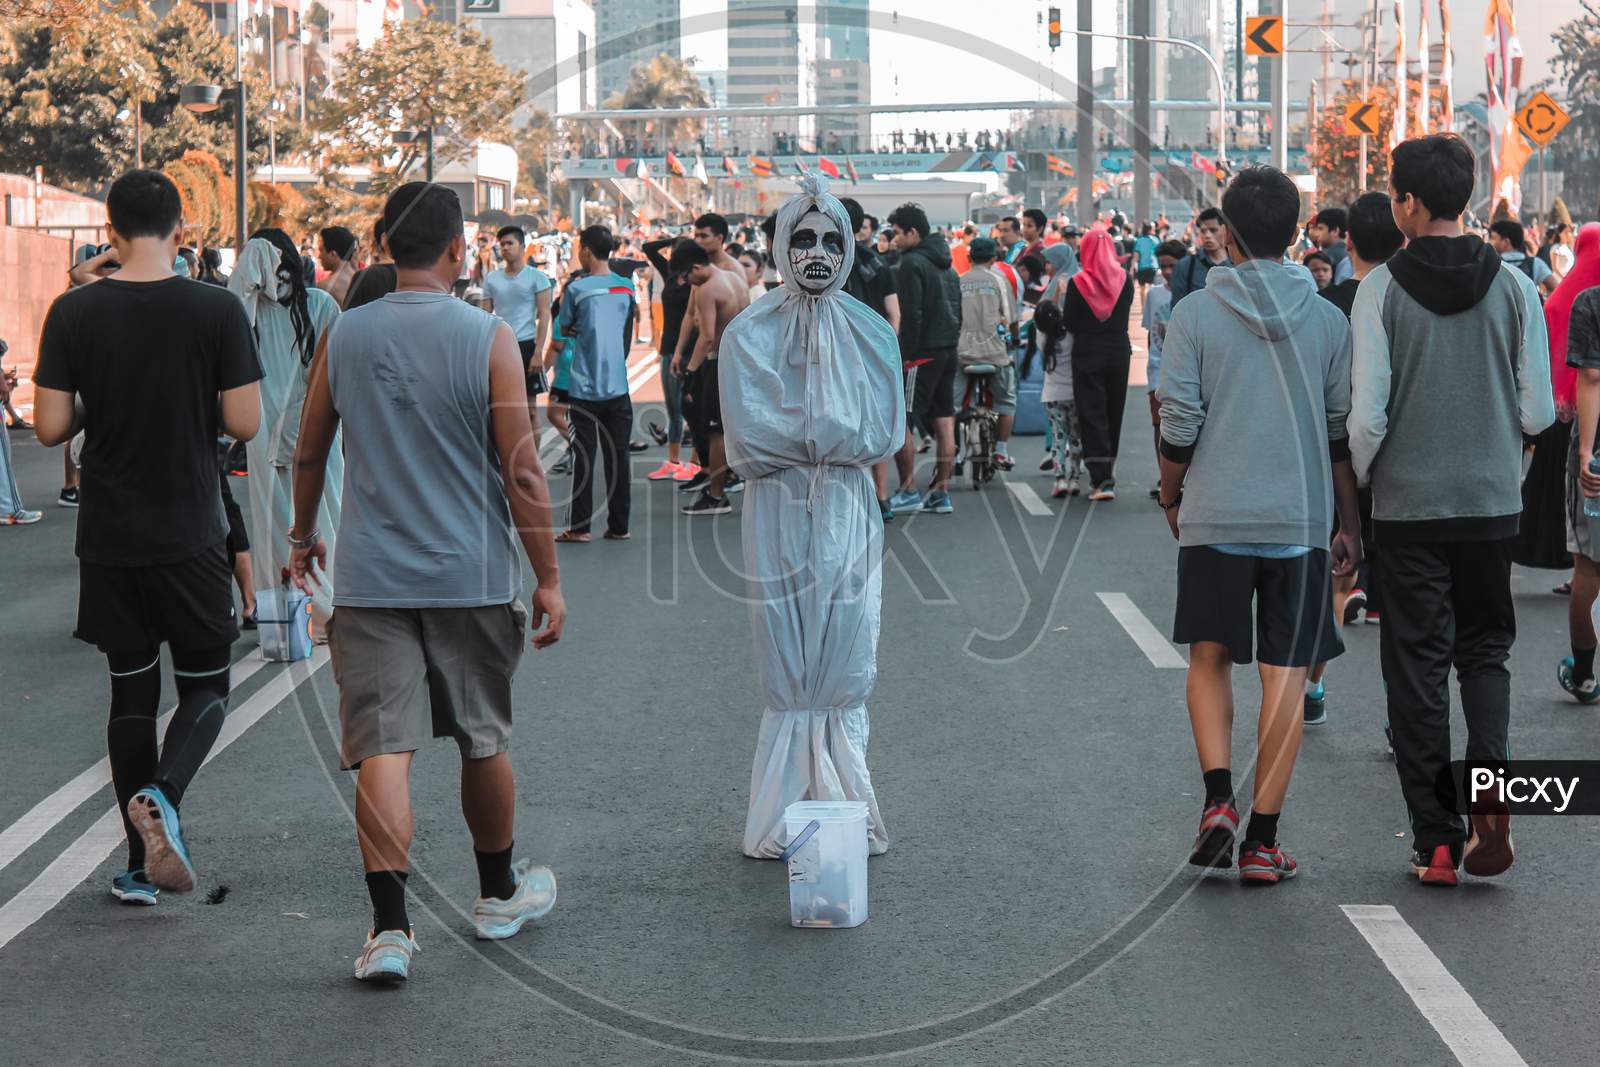  A person dressed in a traditional Indonesian pocong ghost costume walks down a busy street during a parade.